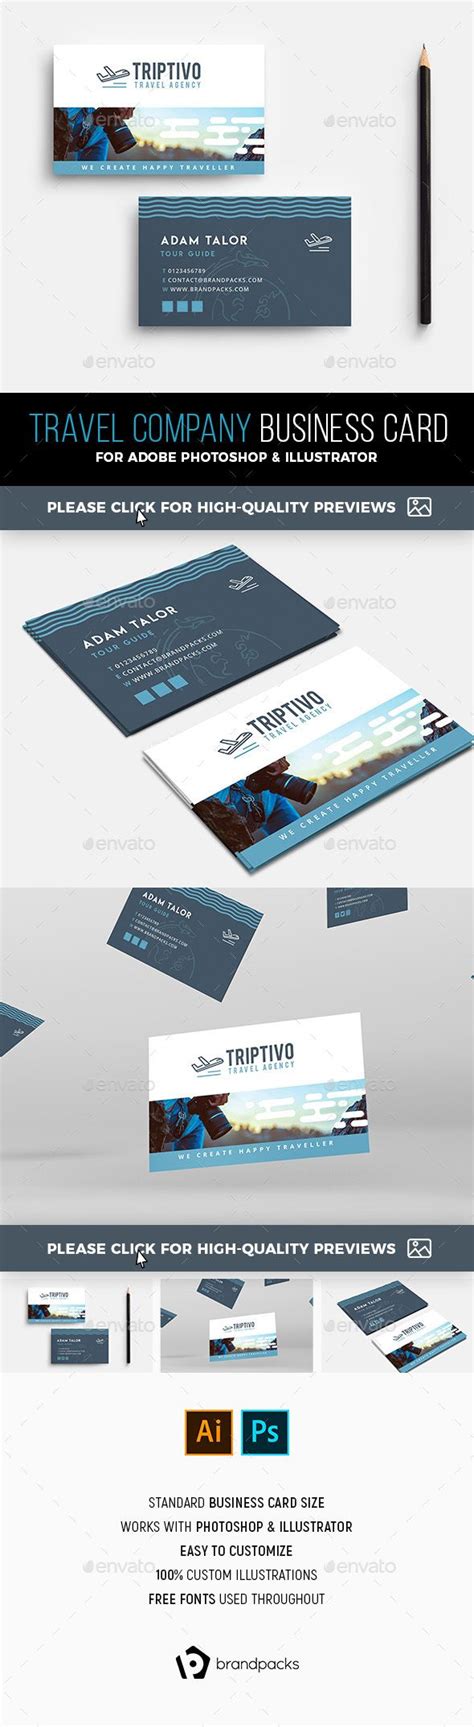 Travel Company Business Card Template For Photoshop And Illustrator A